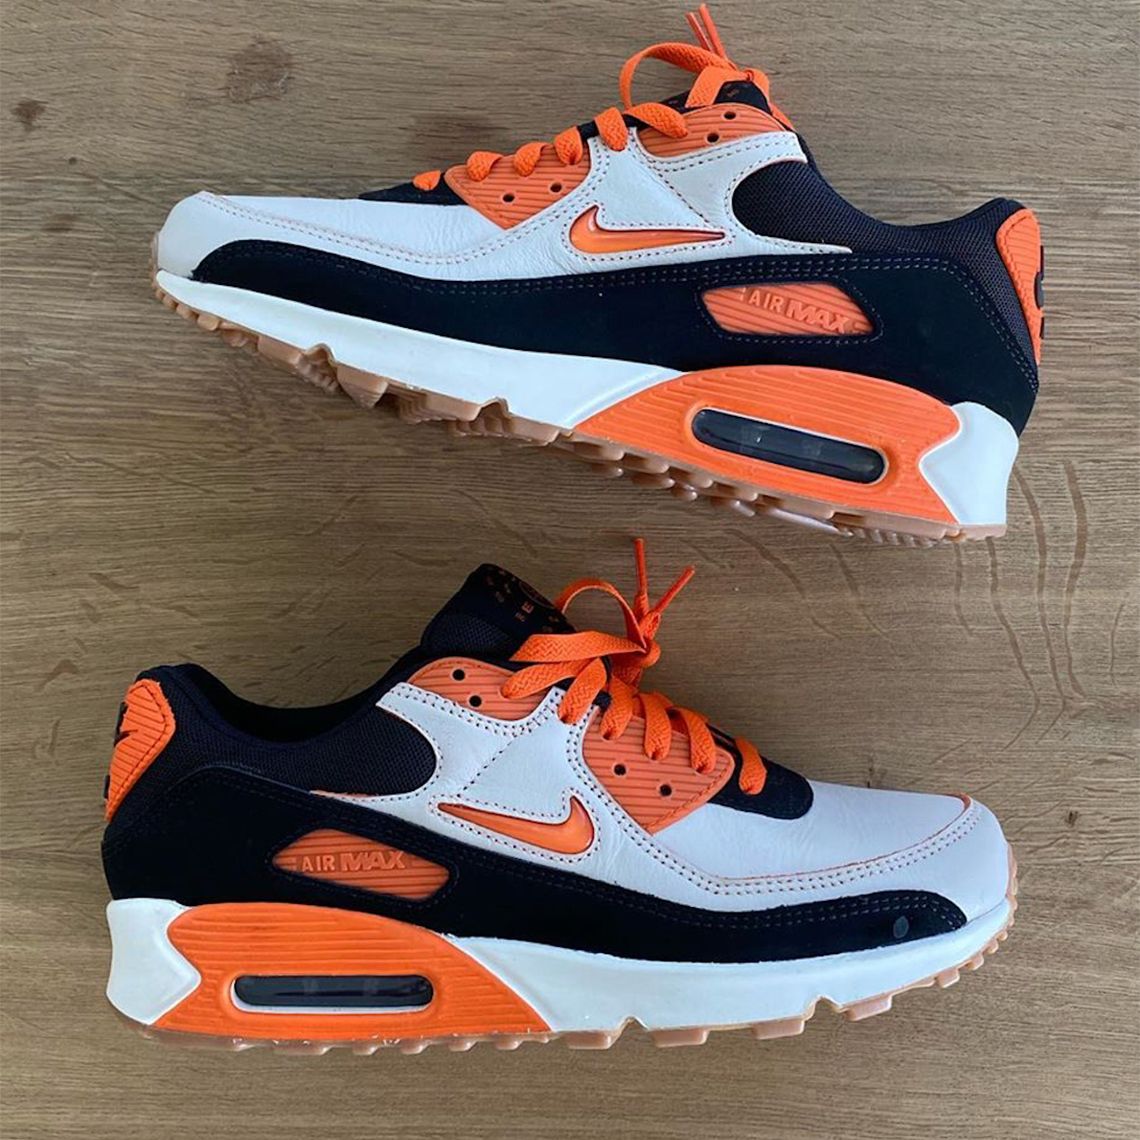 First Look: Nike Air Max 90 'Home and Away' Pack - Sneaker Freaker